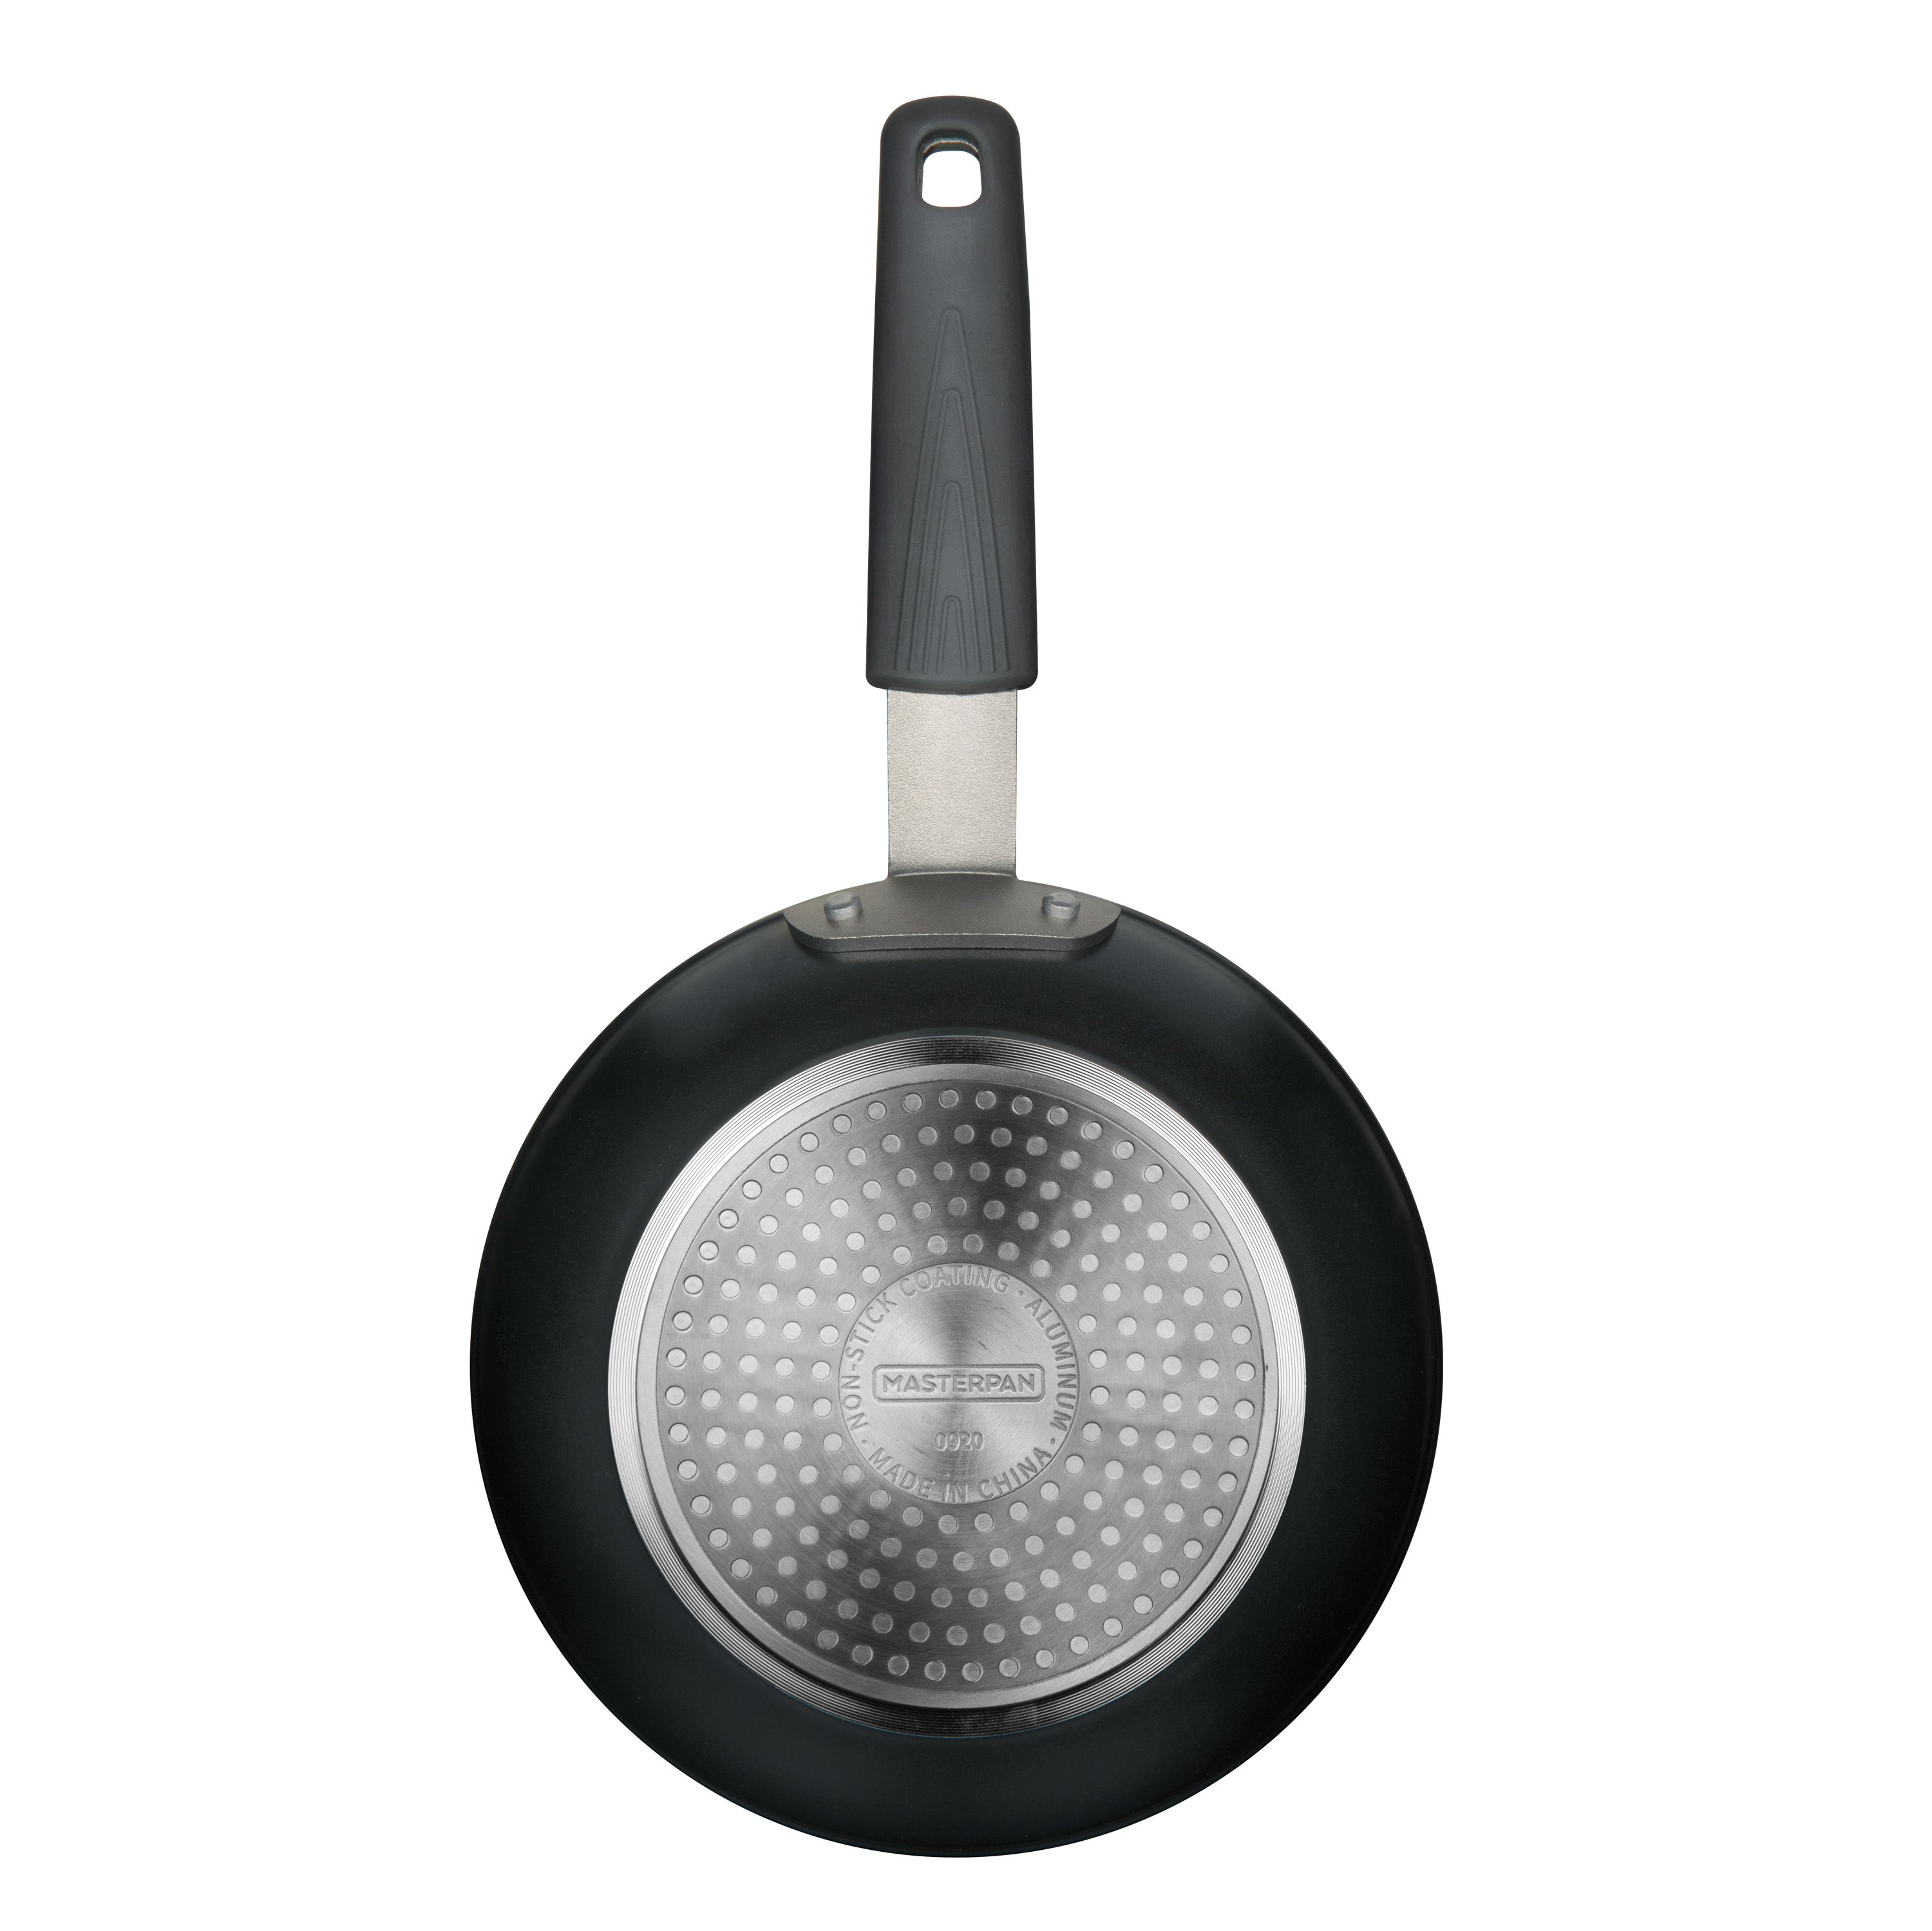 T-fal Titanium Forged Frying Pan - Black, 8 in - Fry's Food Stores